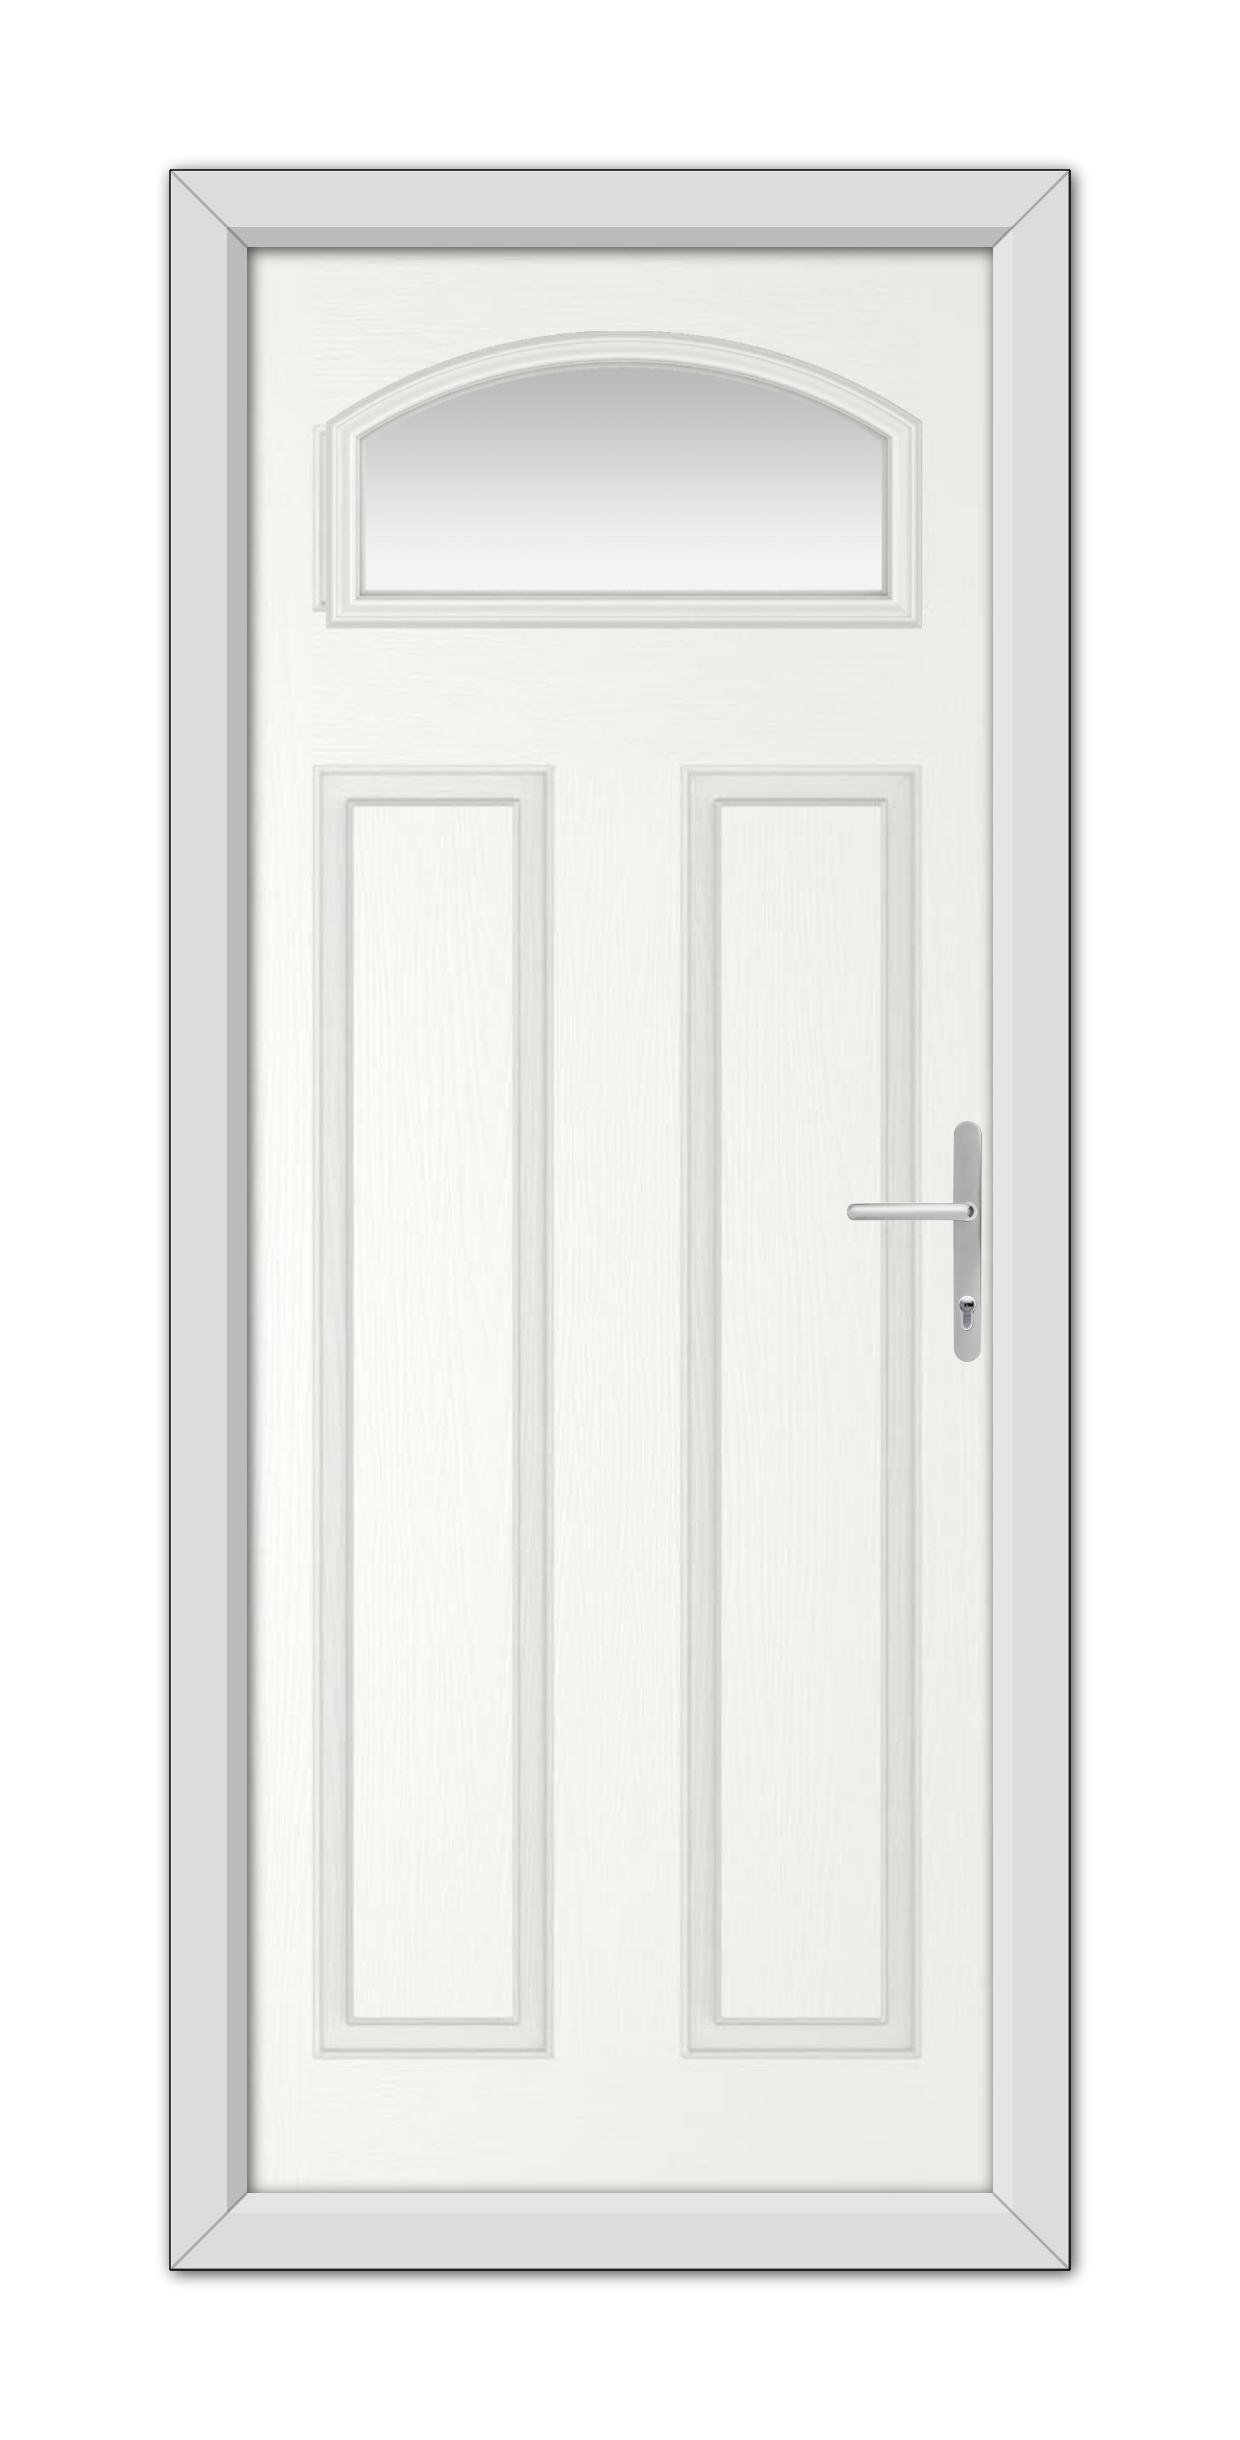 A White Harlington Composite Door 48mm Timber Core with a semi-circular window at the top, metal handle on the right, and a grey frame, isolated on a white background.